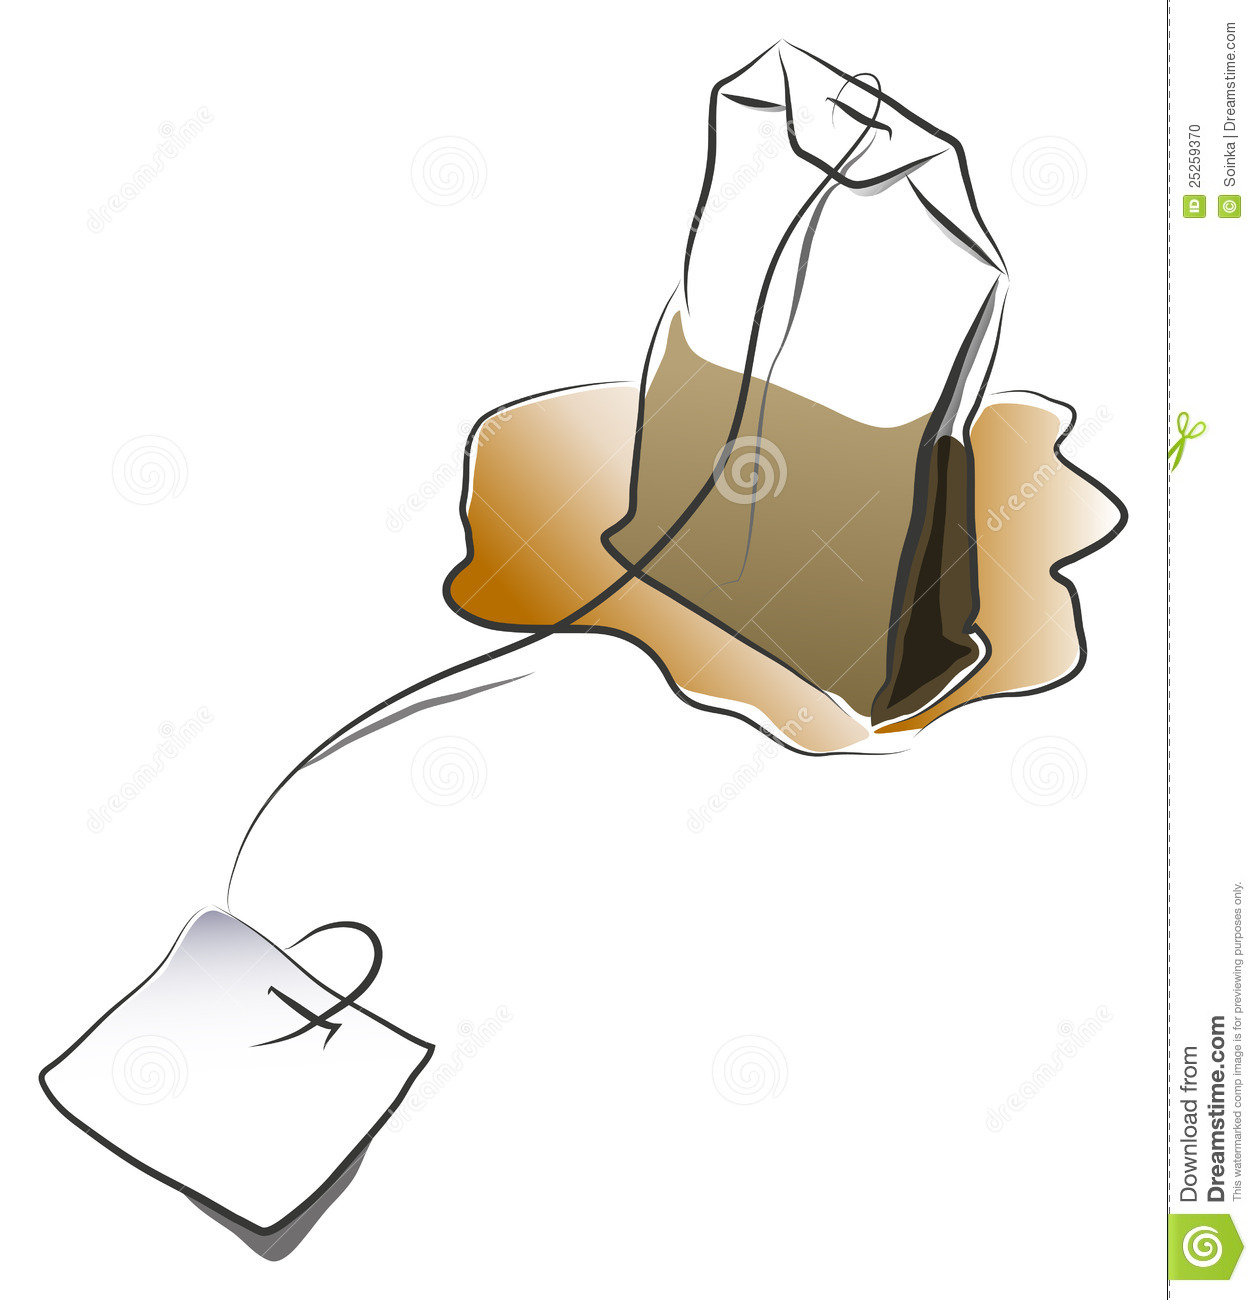 Tea Bag Clipart Images   Pictures   Becuo